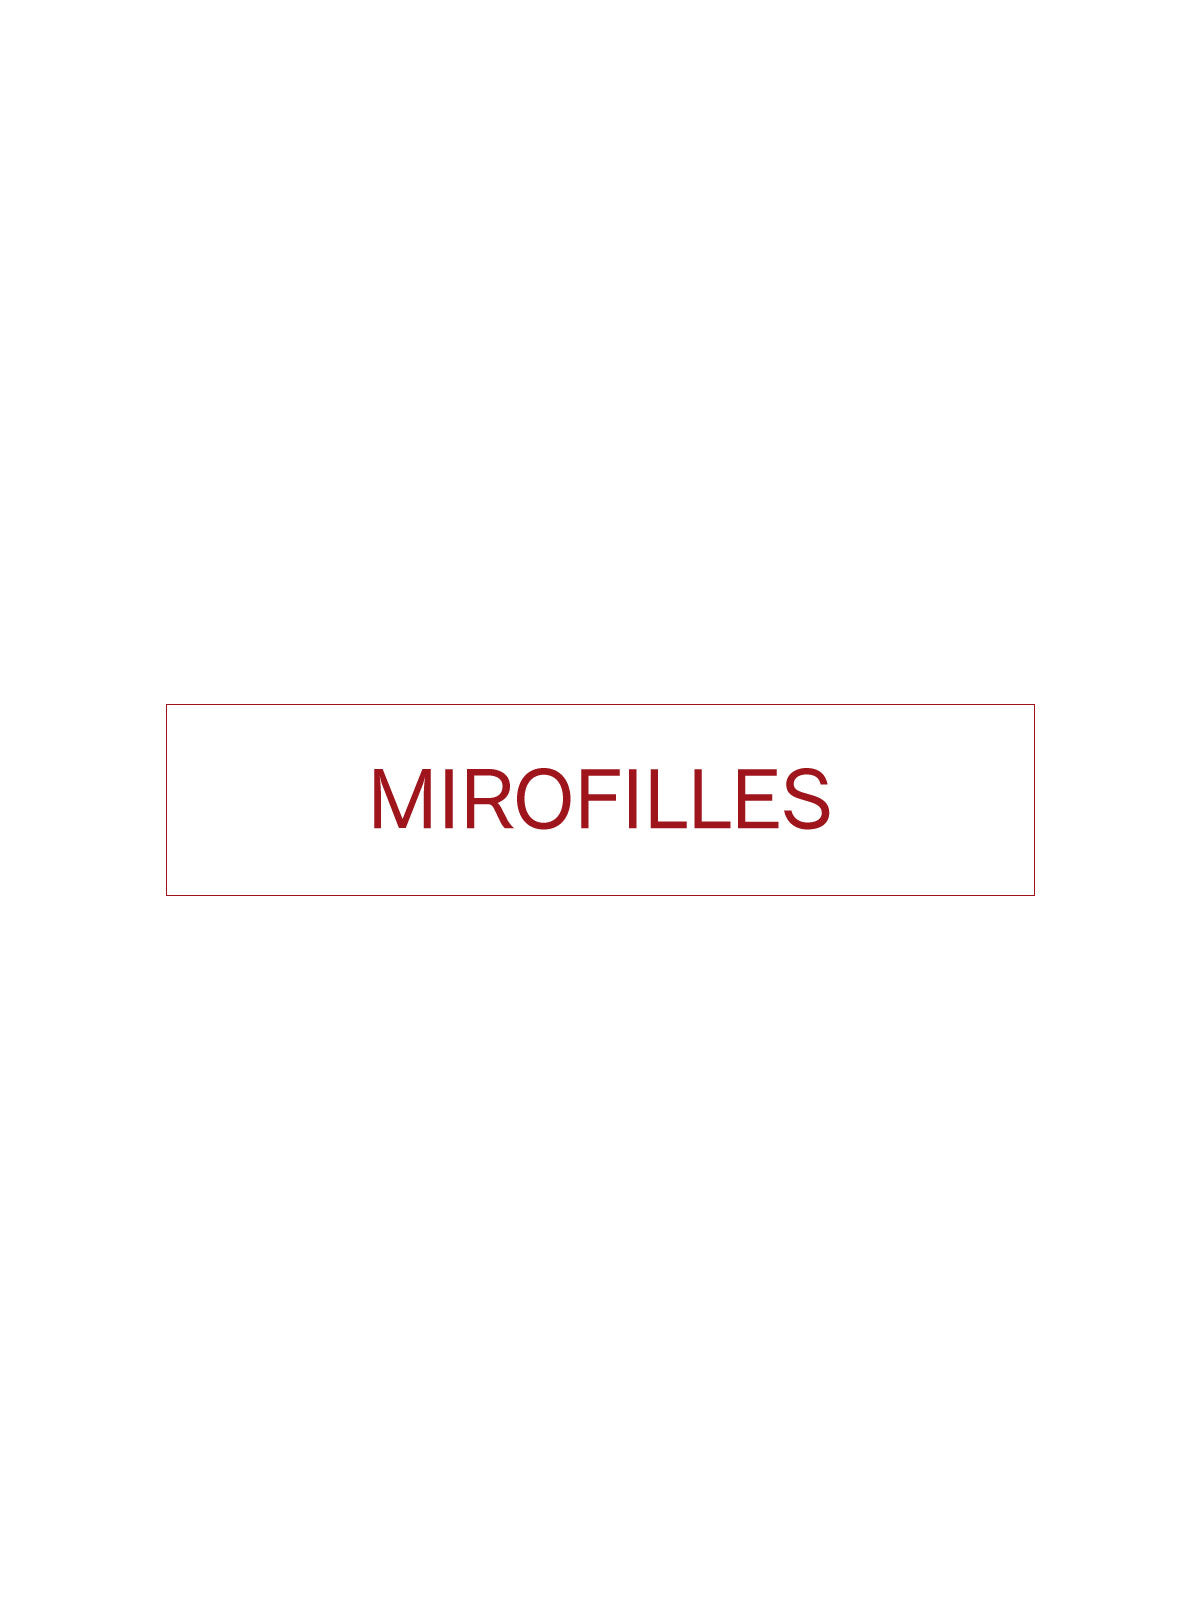 about miro filles